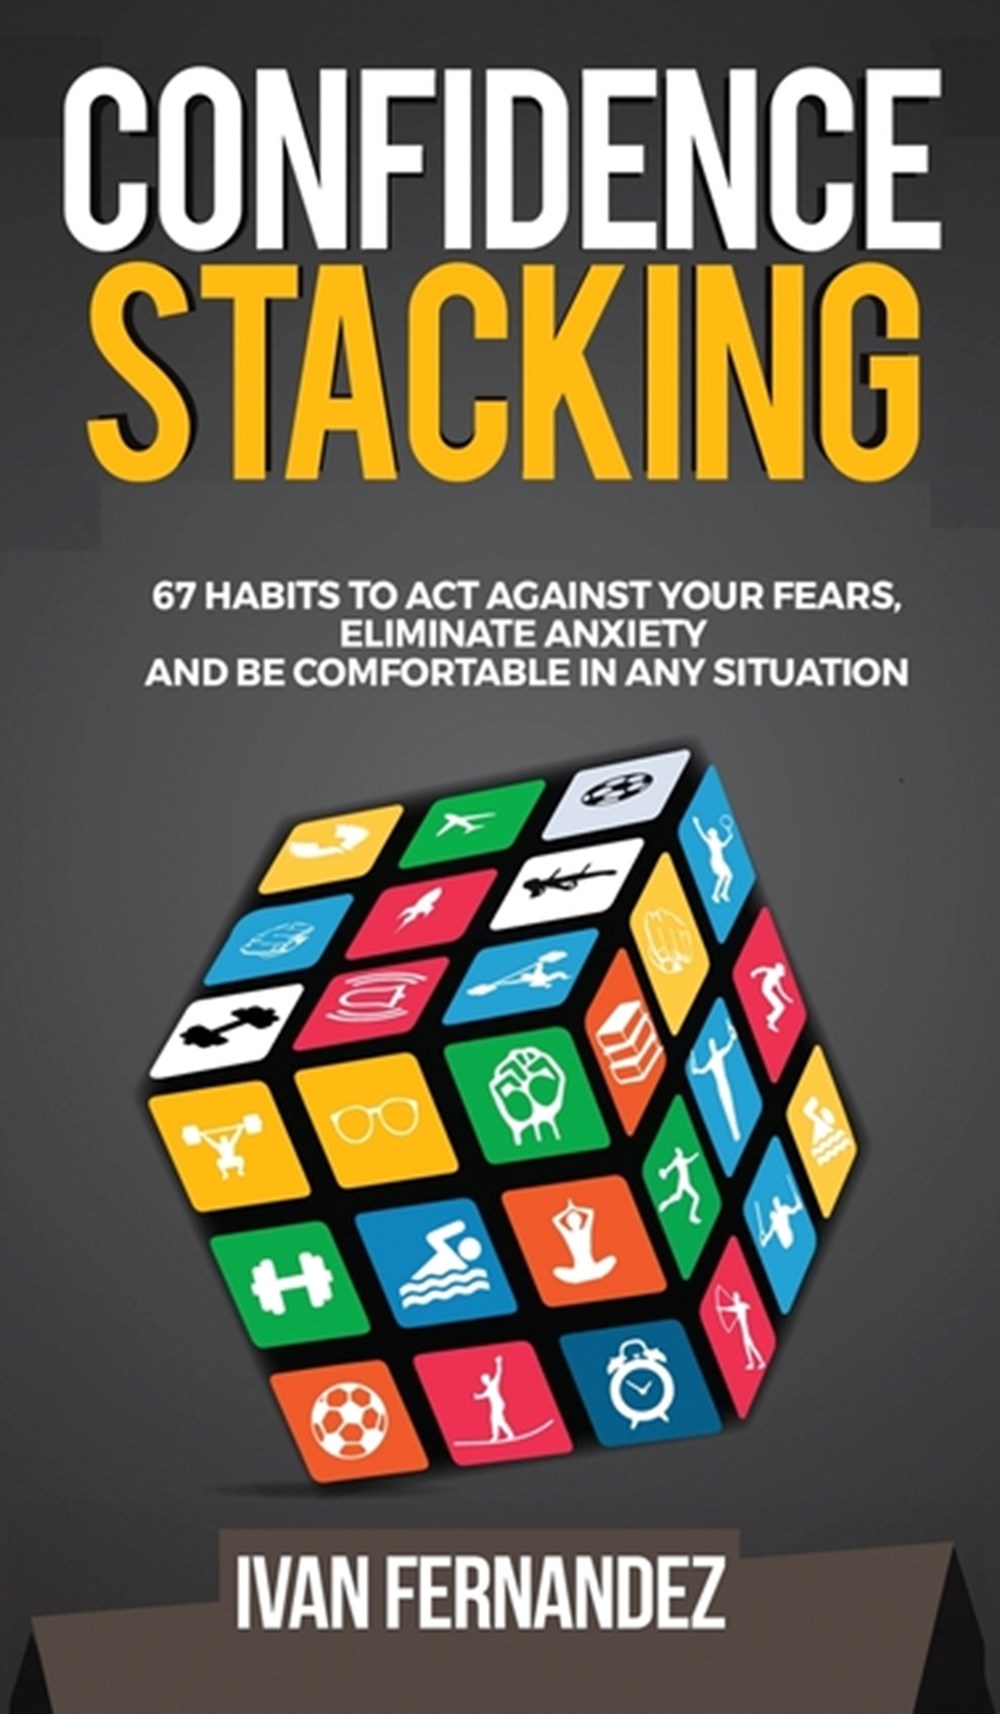 Confidence Stacking 67 Habits to Act Against Your Fears, Eliminate Anxiety and Be Comfortable in Any